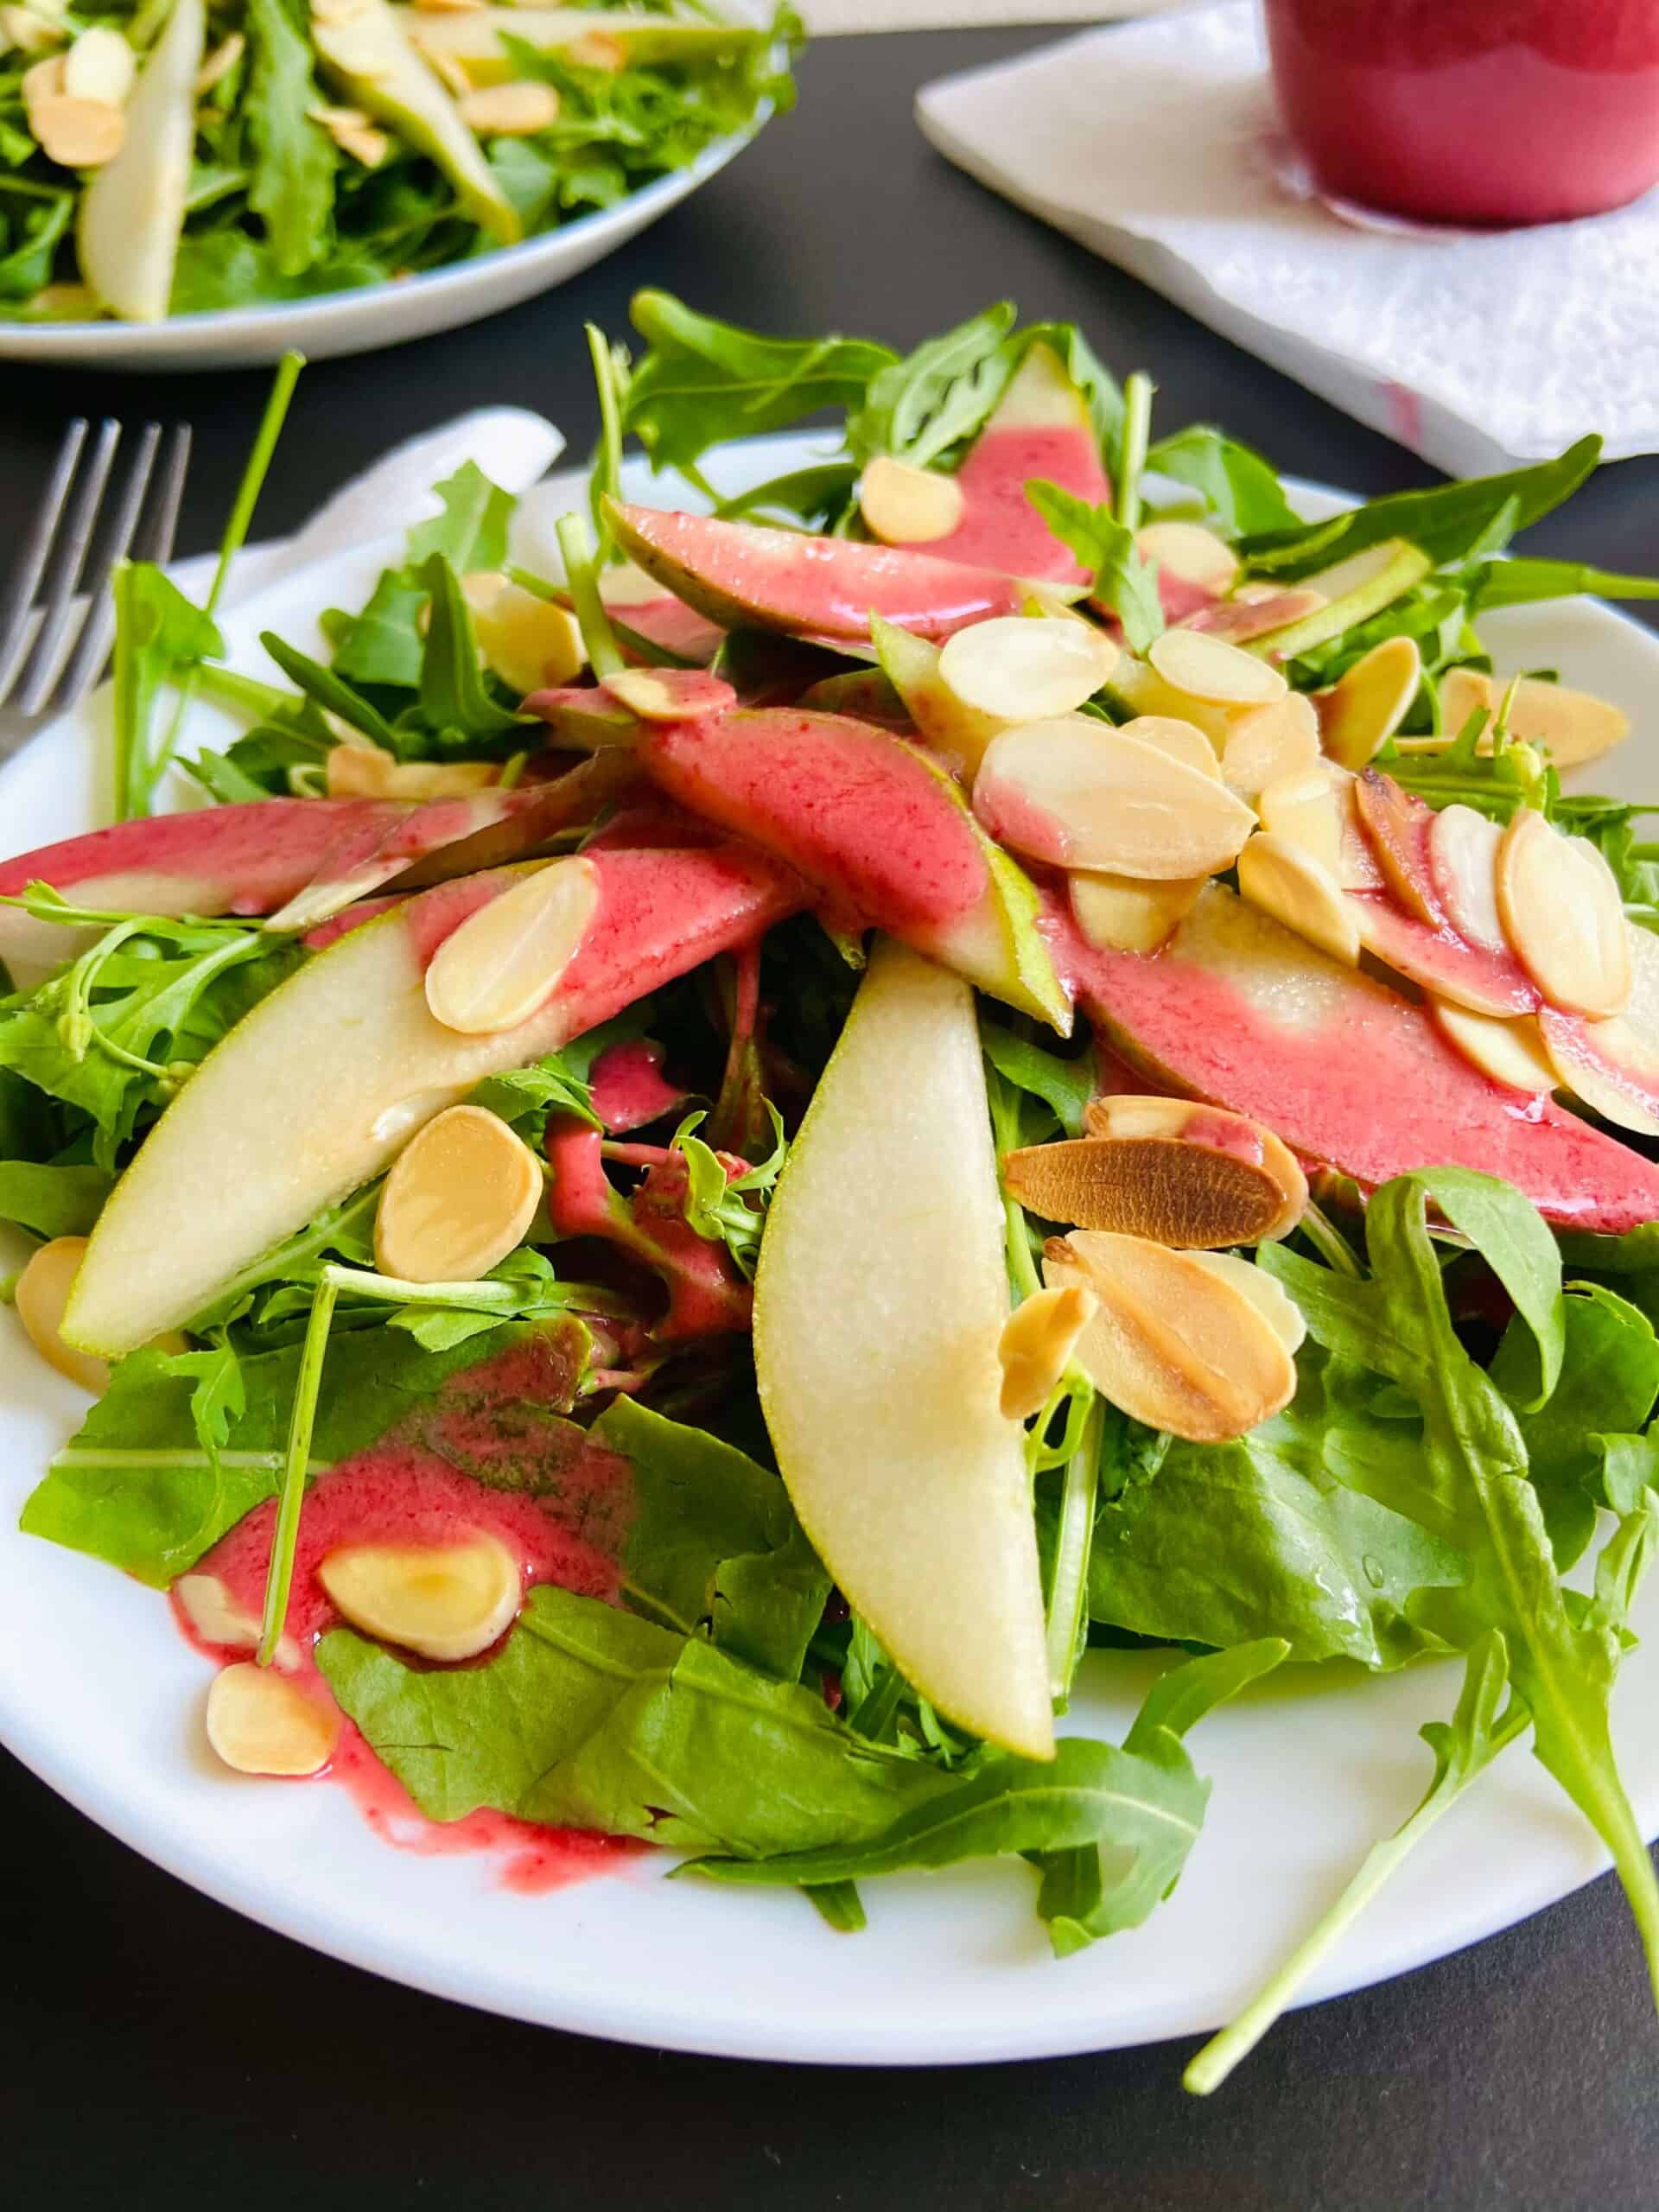 Rocket and Pear Salad with Sweet Cherry Vinaigrette